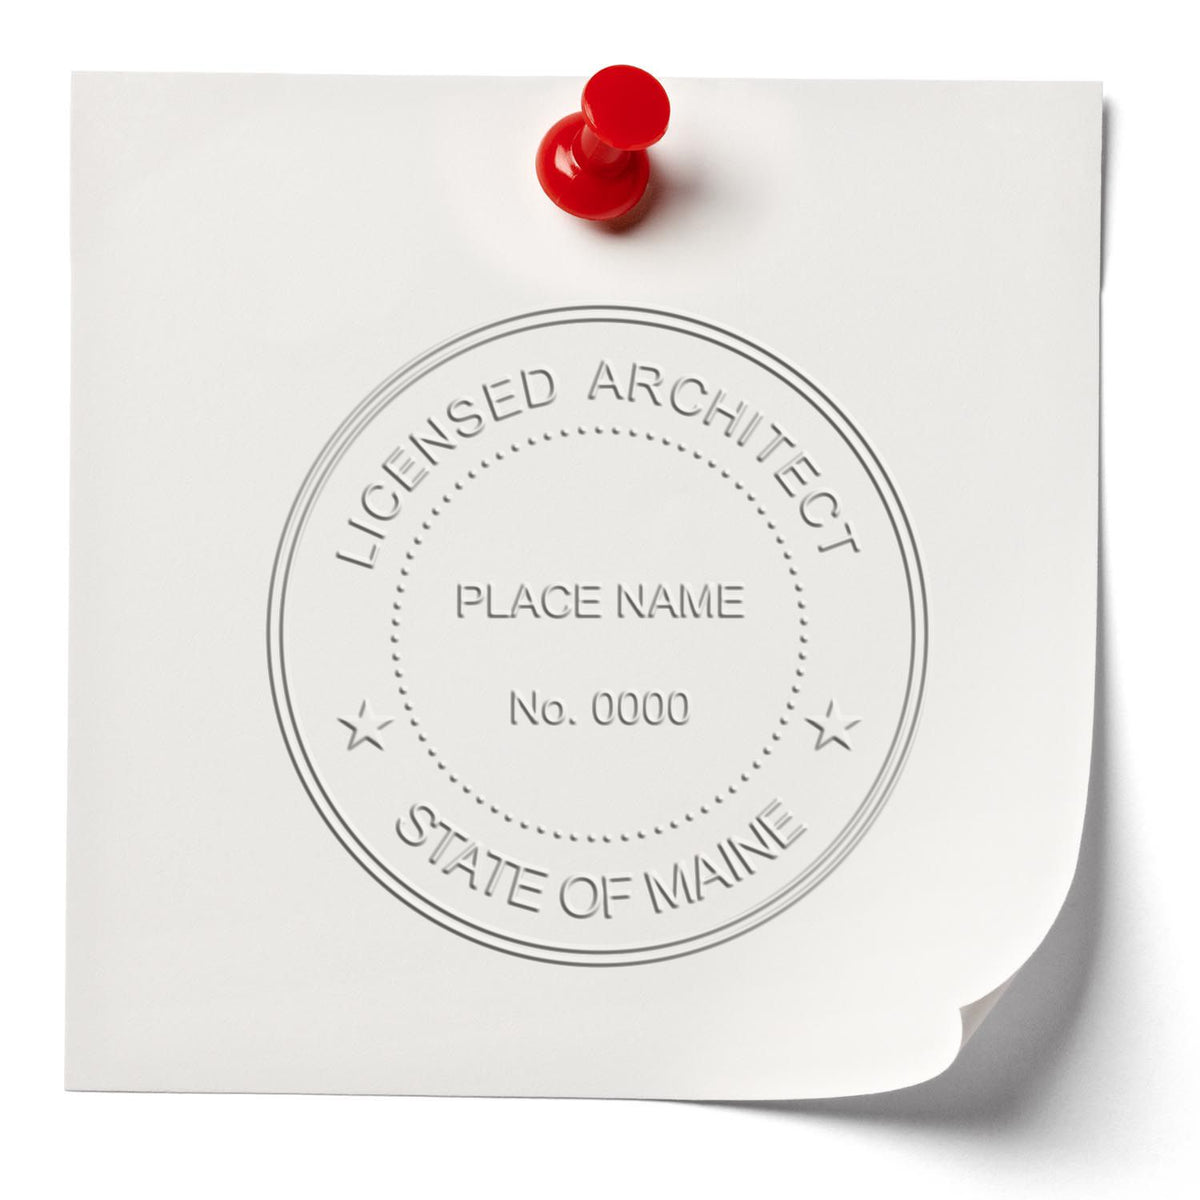 A stamped impression of the State of Maine Architectural Seal Embosser in this stylish lifestyle photo, setting the tone for a unique and personalized product.